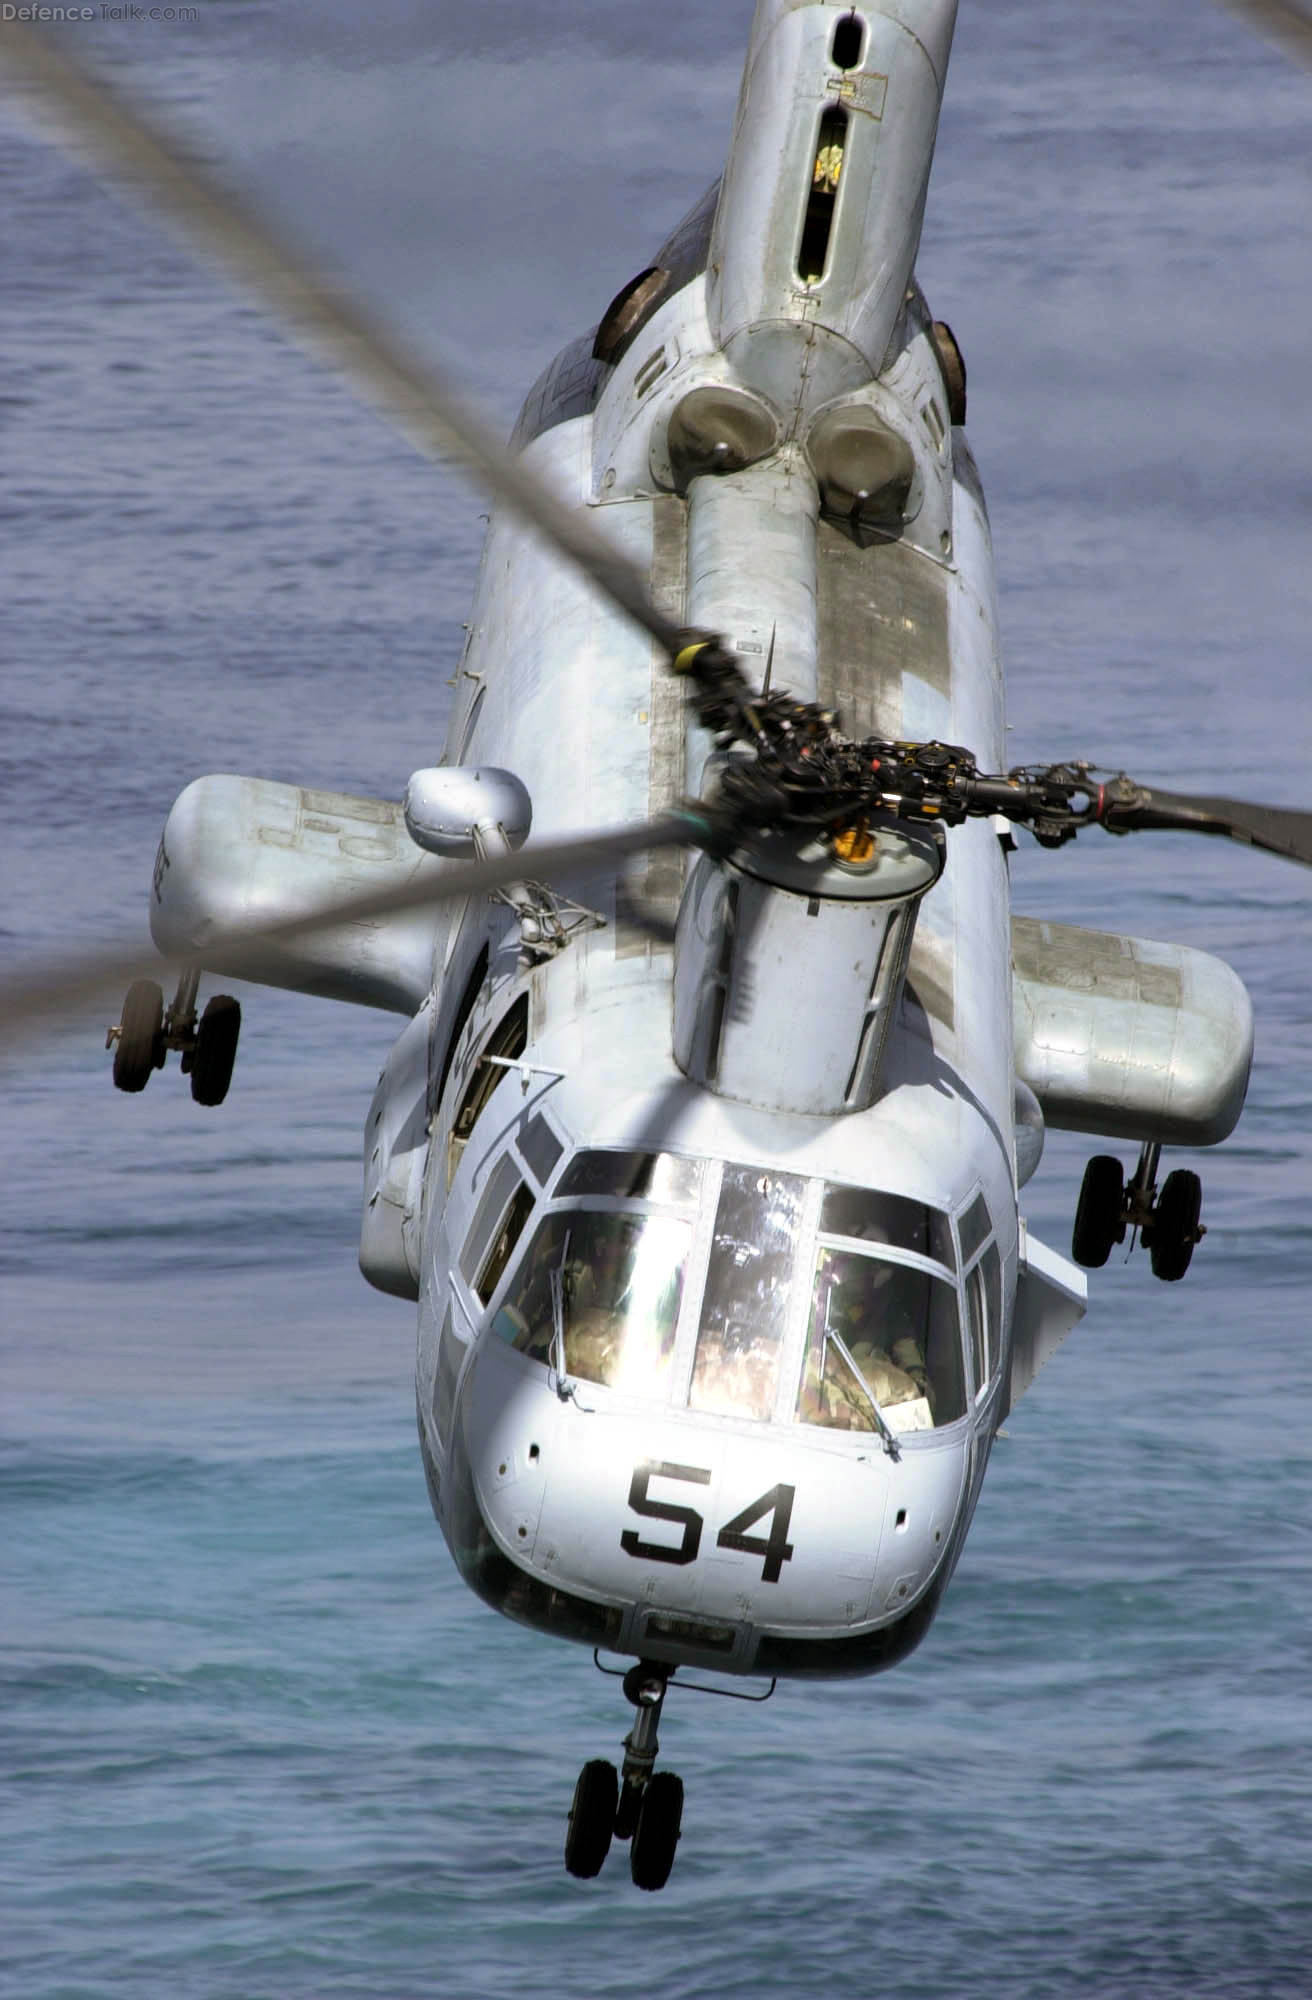 US Navy CH-46 helicopter